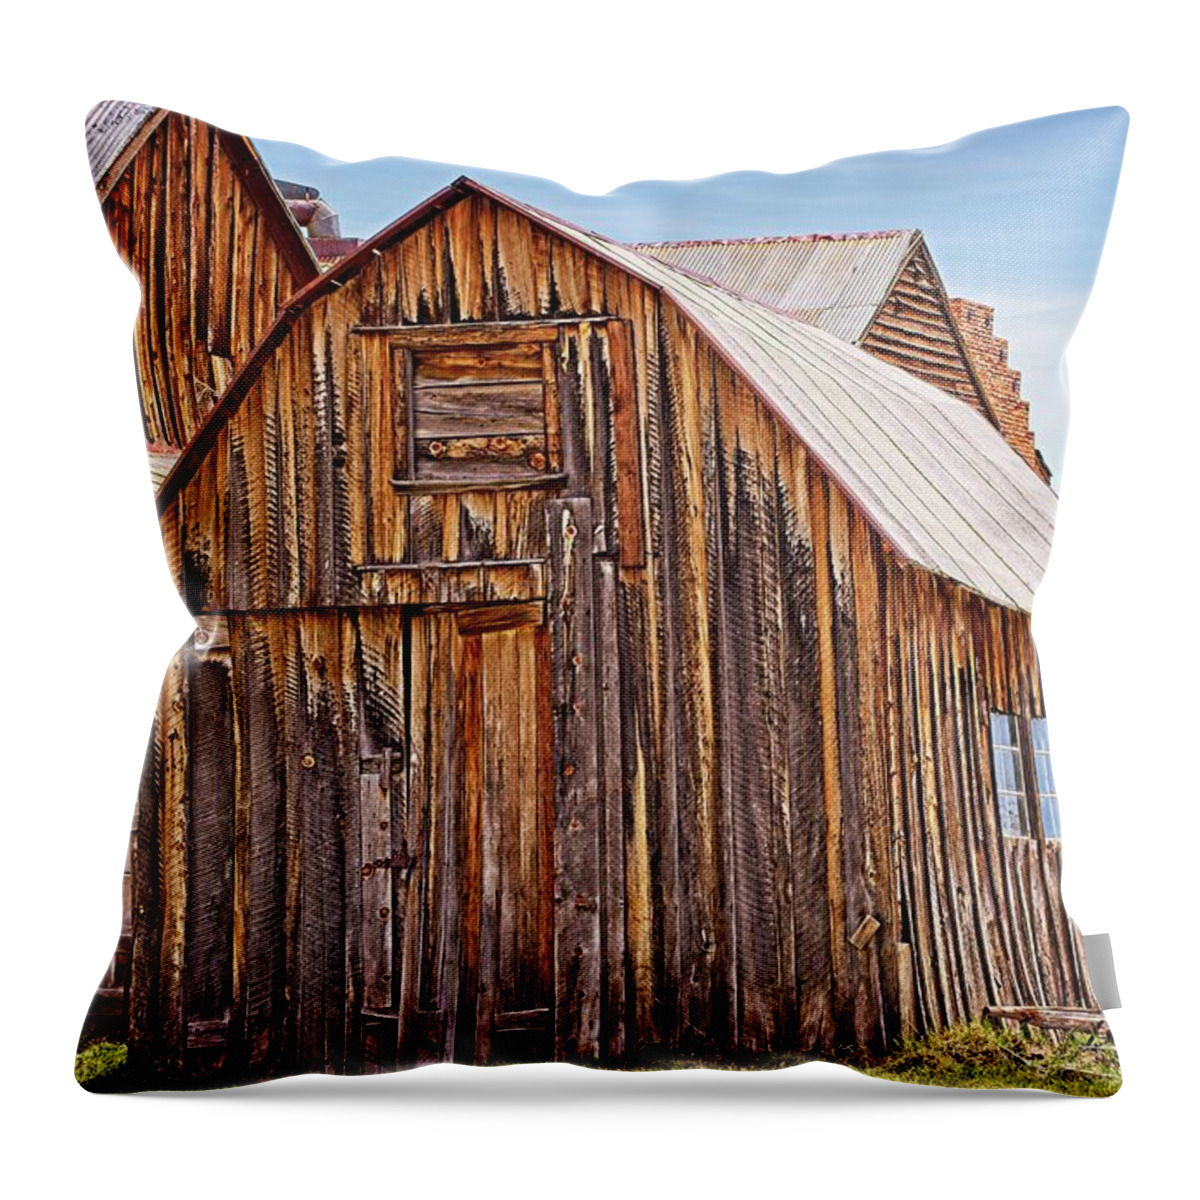 Famous Place Throw Pillow featuring the photograph Bodie Buildings by David Desautel